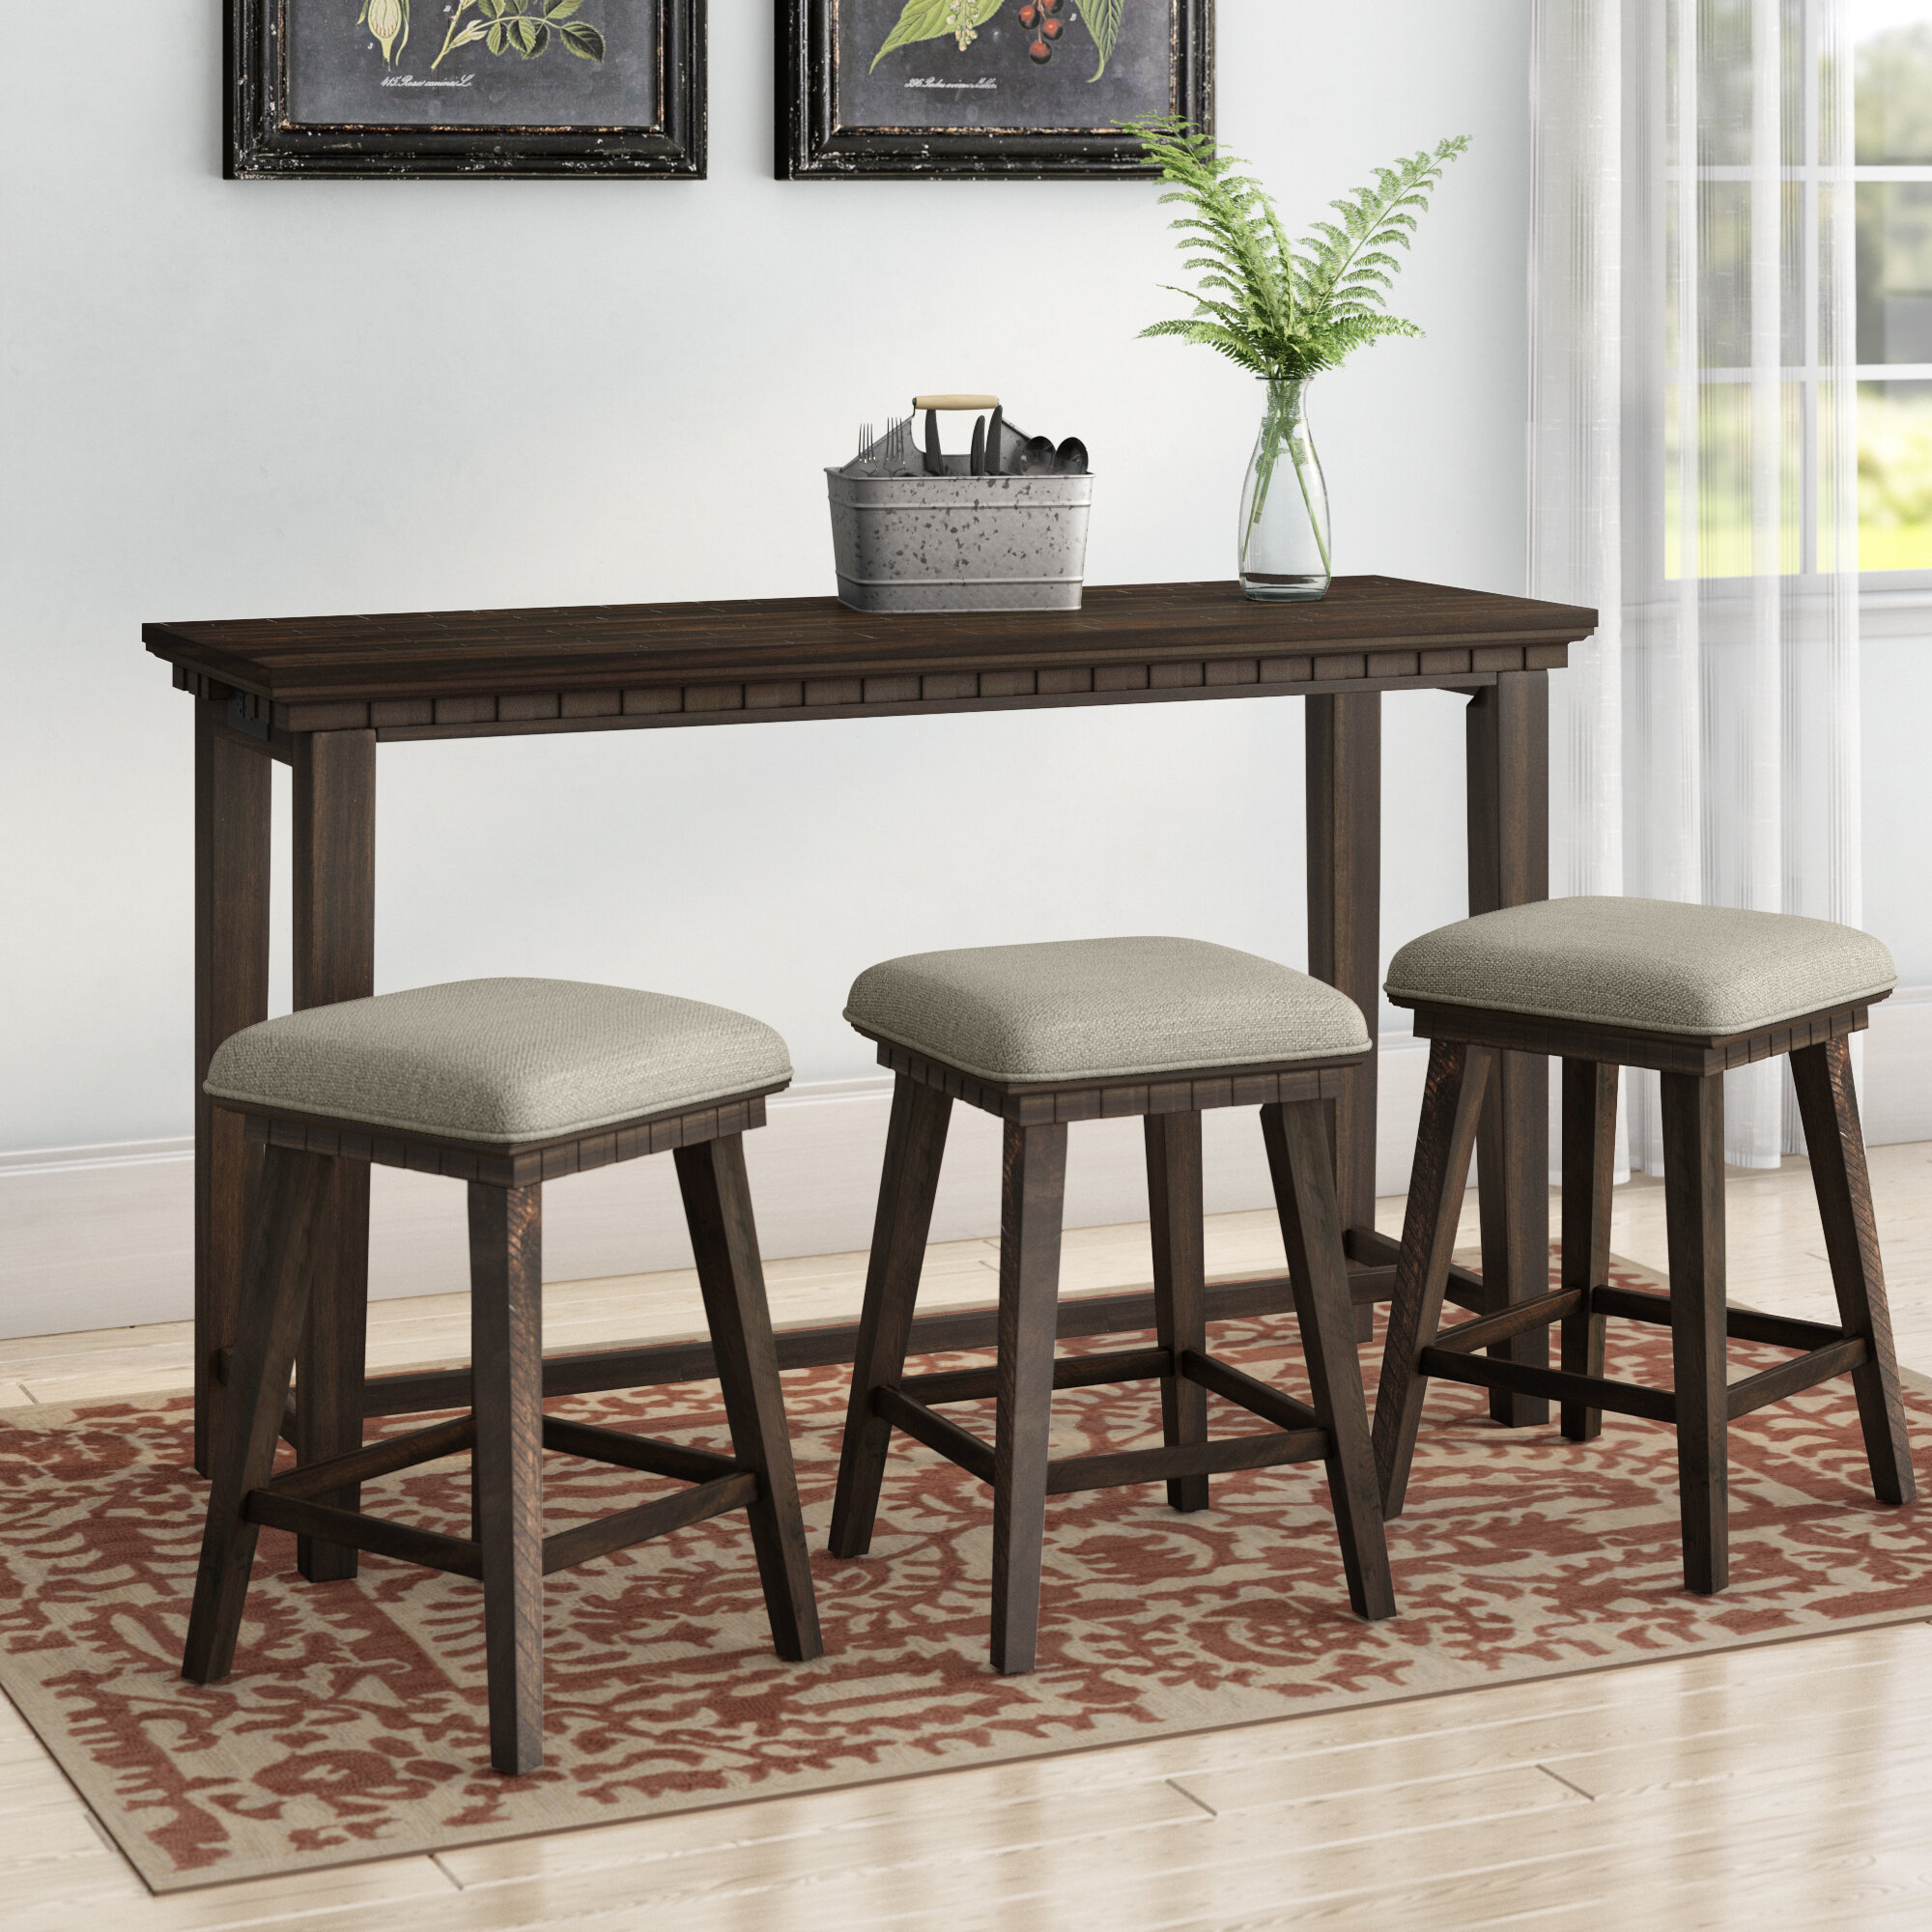 3 Piece Pub Table Set Bar Stools Kitchen Dining Furniture Counter Height Chairs 